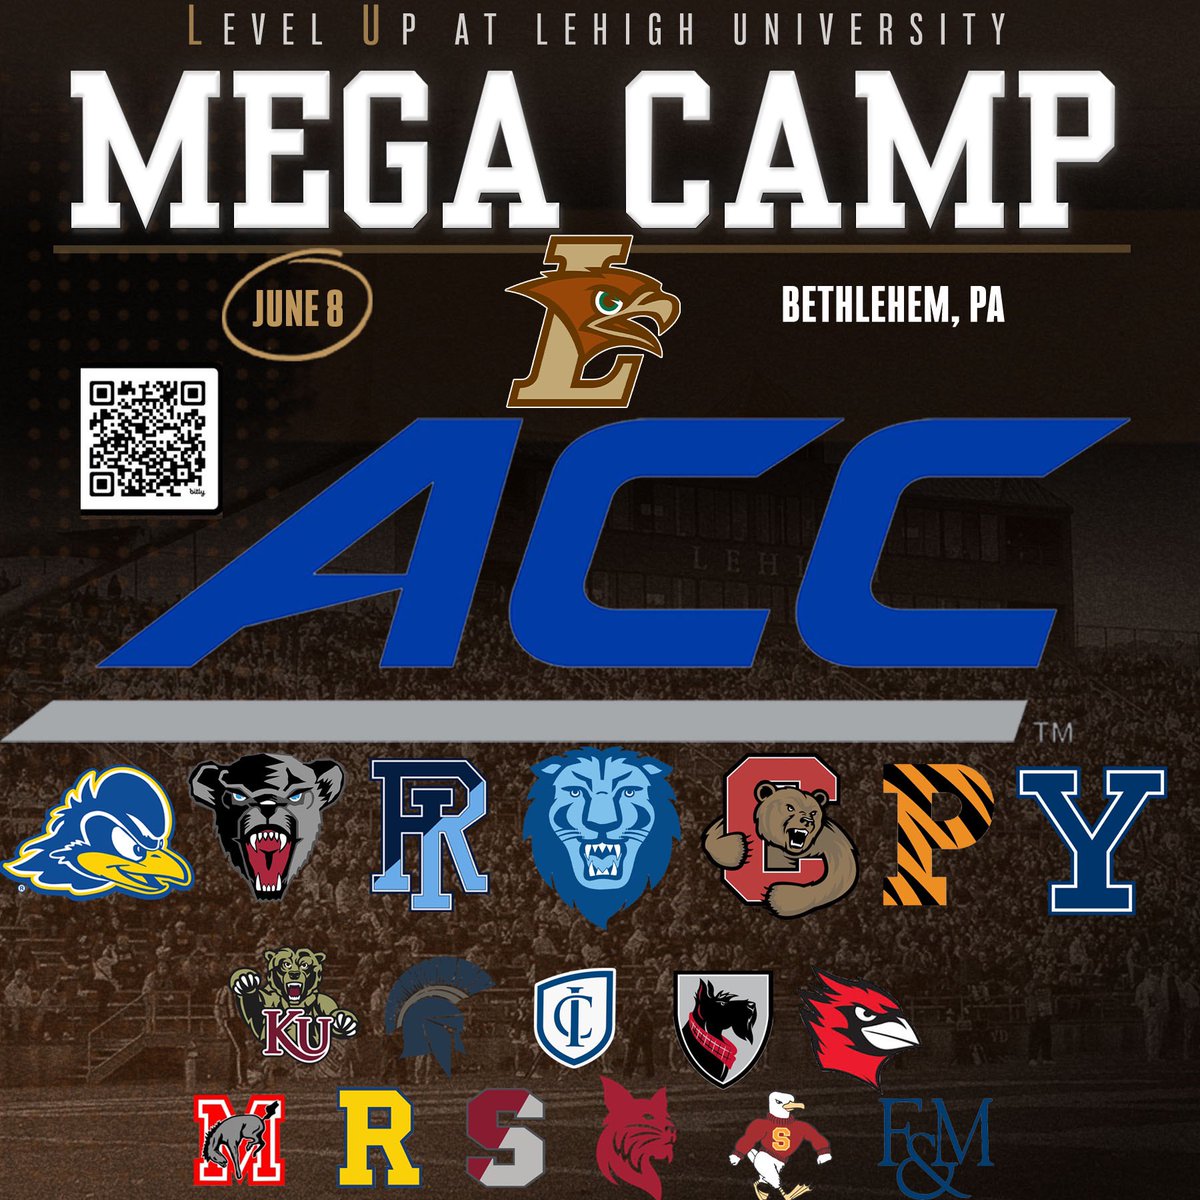 DO NOT MISS YOUR CHANCE TO COMPETE ON THE MOUNTAIN THIS SUMMER !! FBS, FCS, DII, DIII 🏔️ 🏔️ 🏔️ @LehighFootball